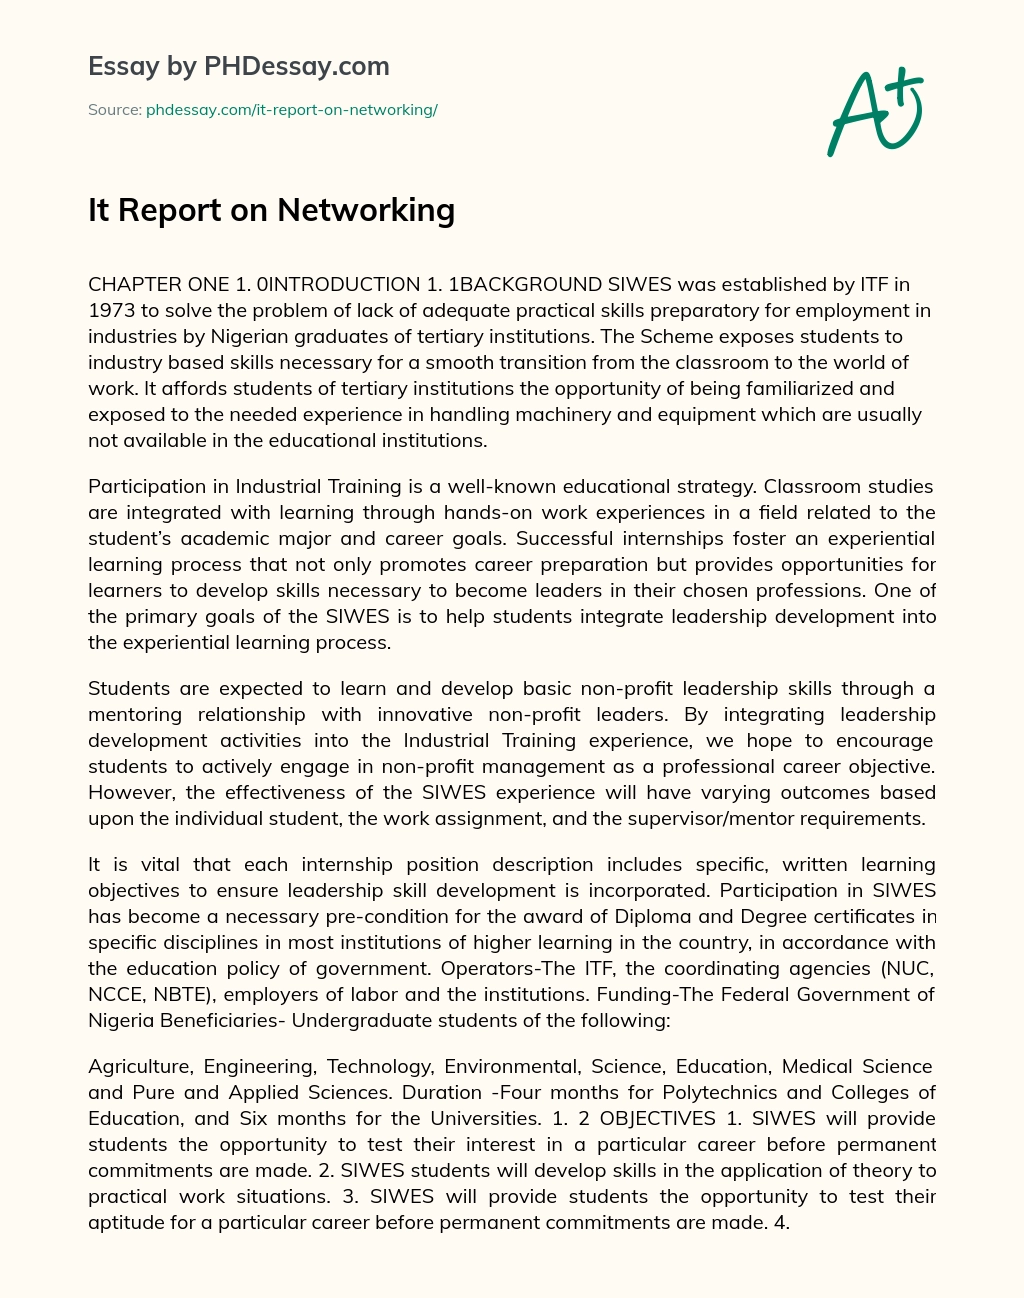 It Report on Networking essay